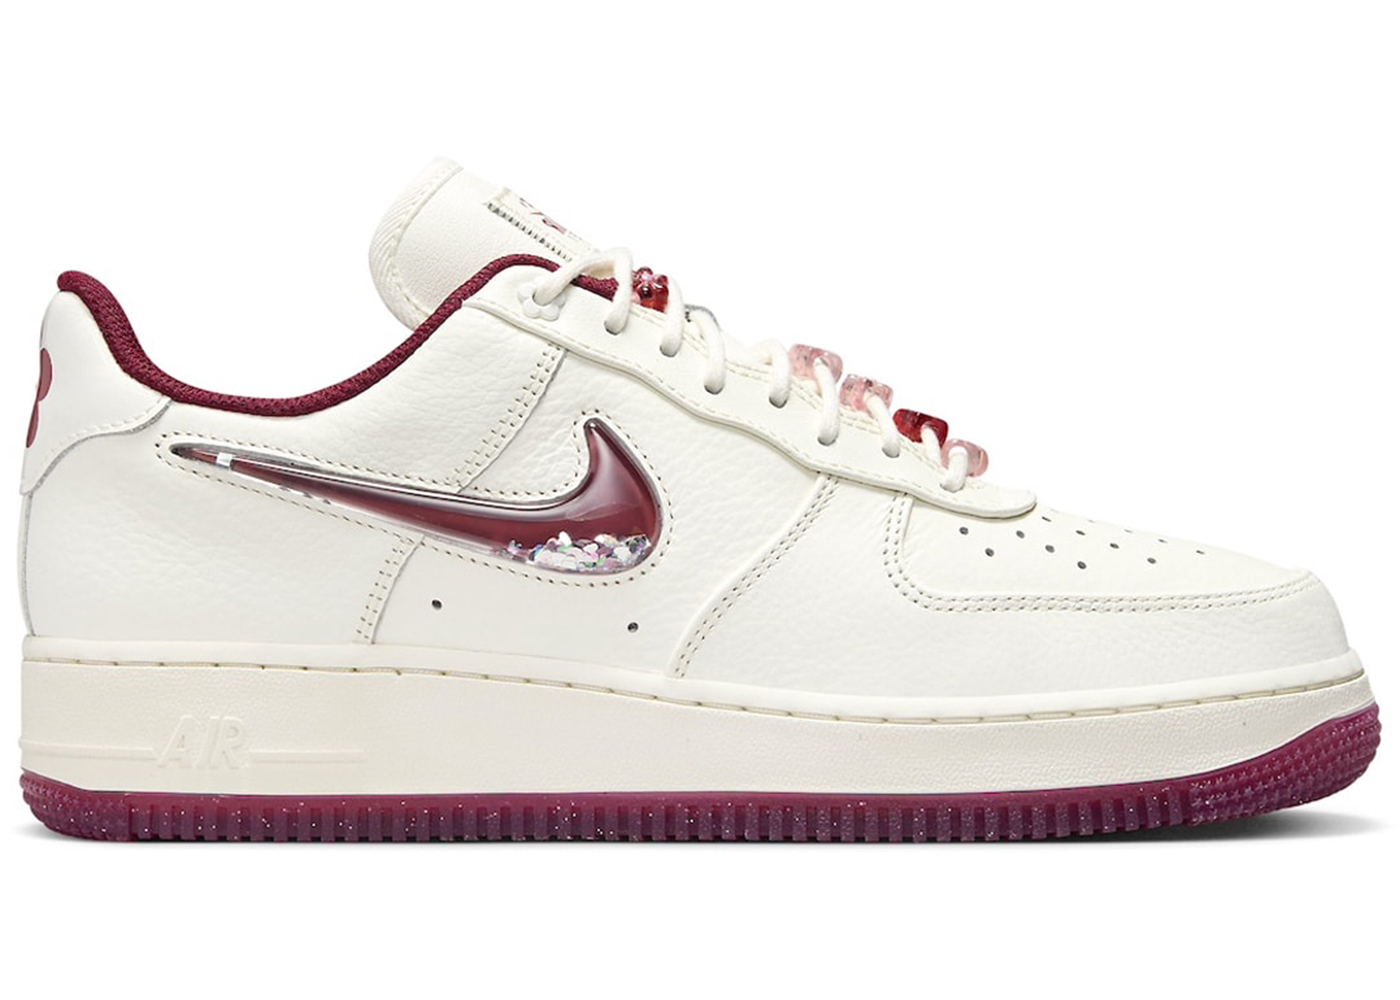 Nike Air Force 1 Low V-Day (Women's)